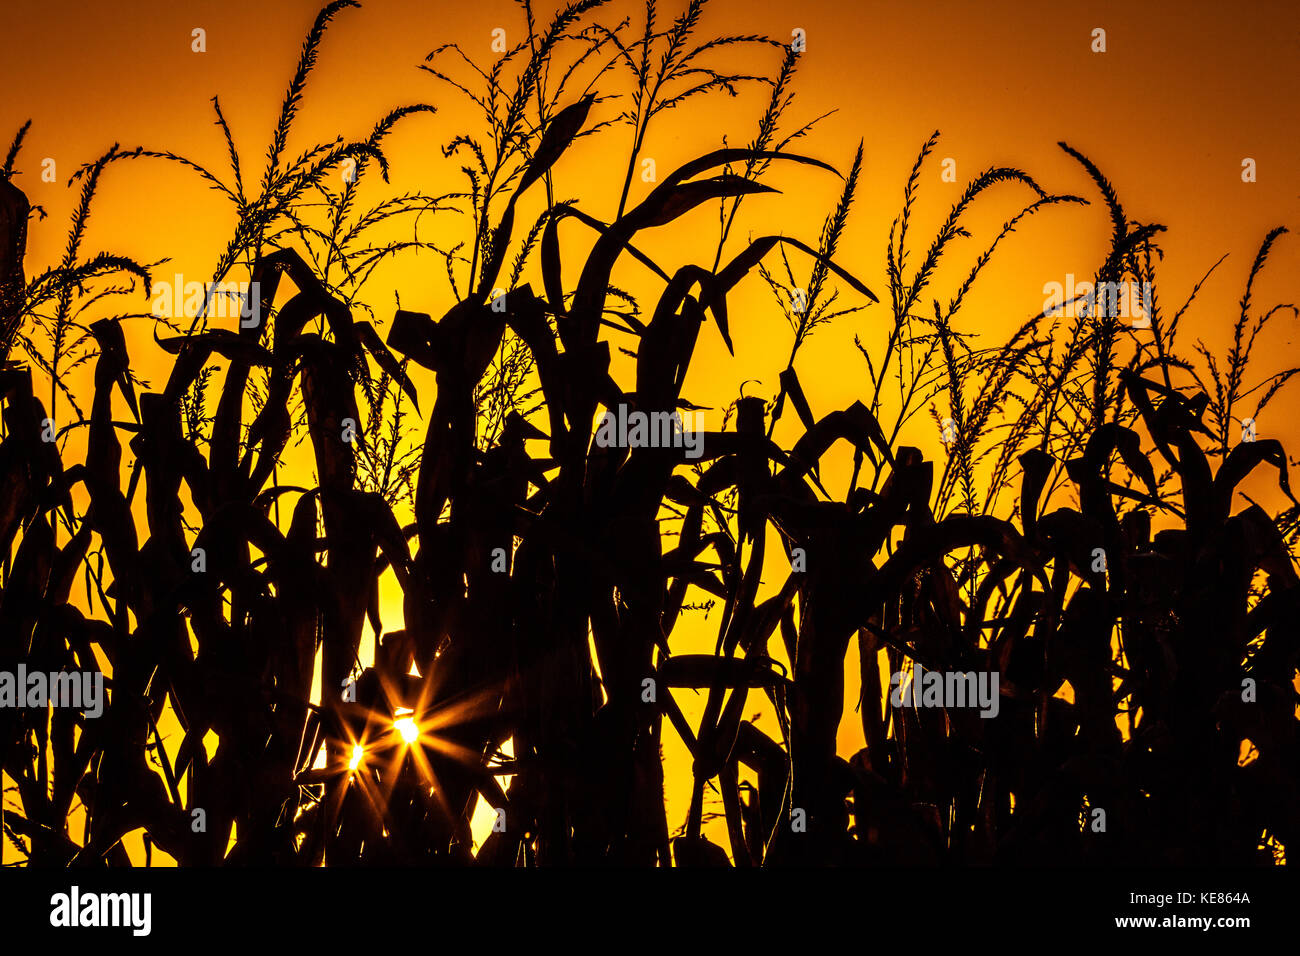 Rows of dry corn stalks are silhouetted against the setting sun with two starbursts and a halo of orange and yellow colors. Stock Photo